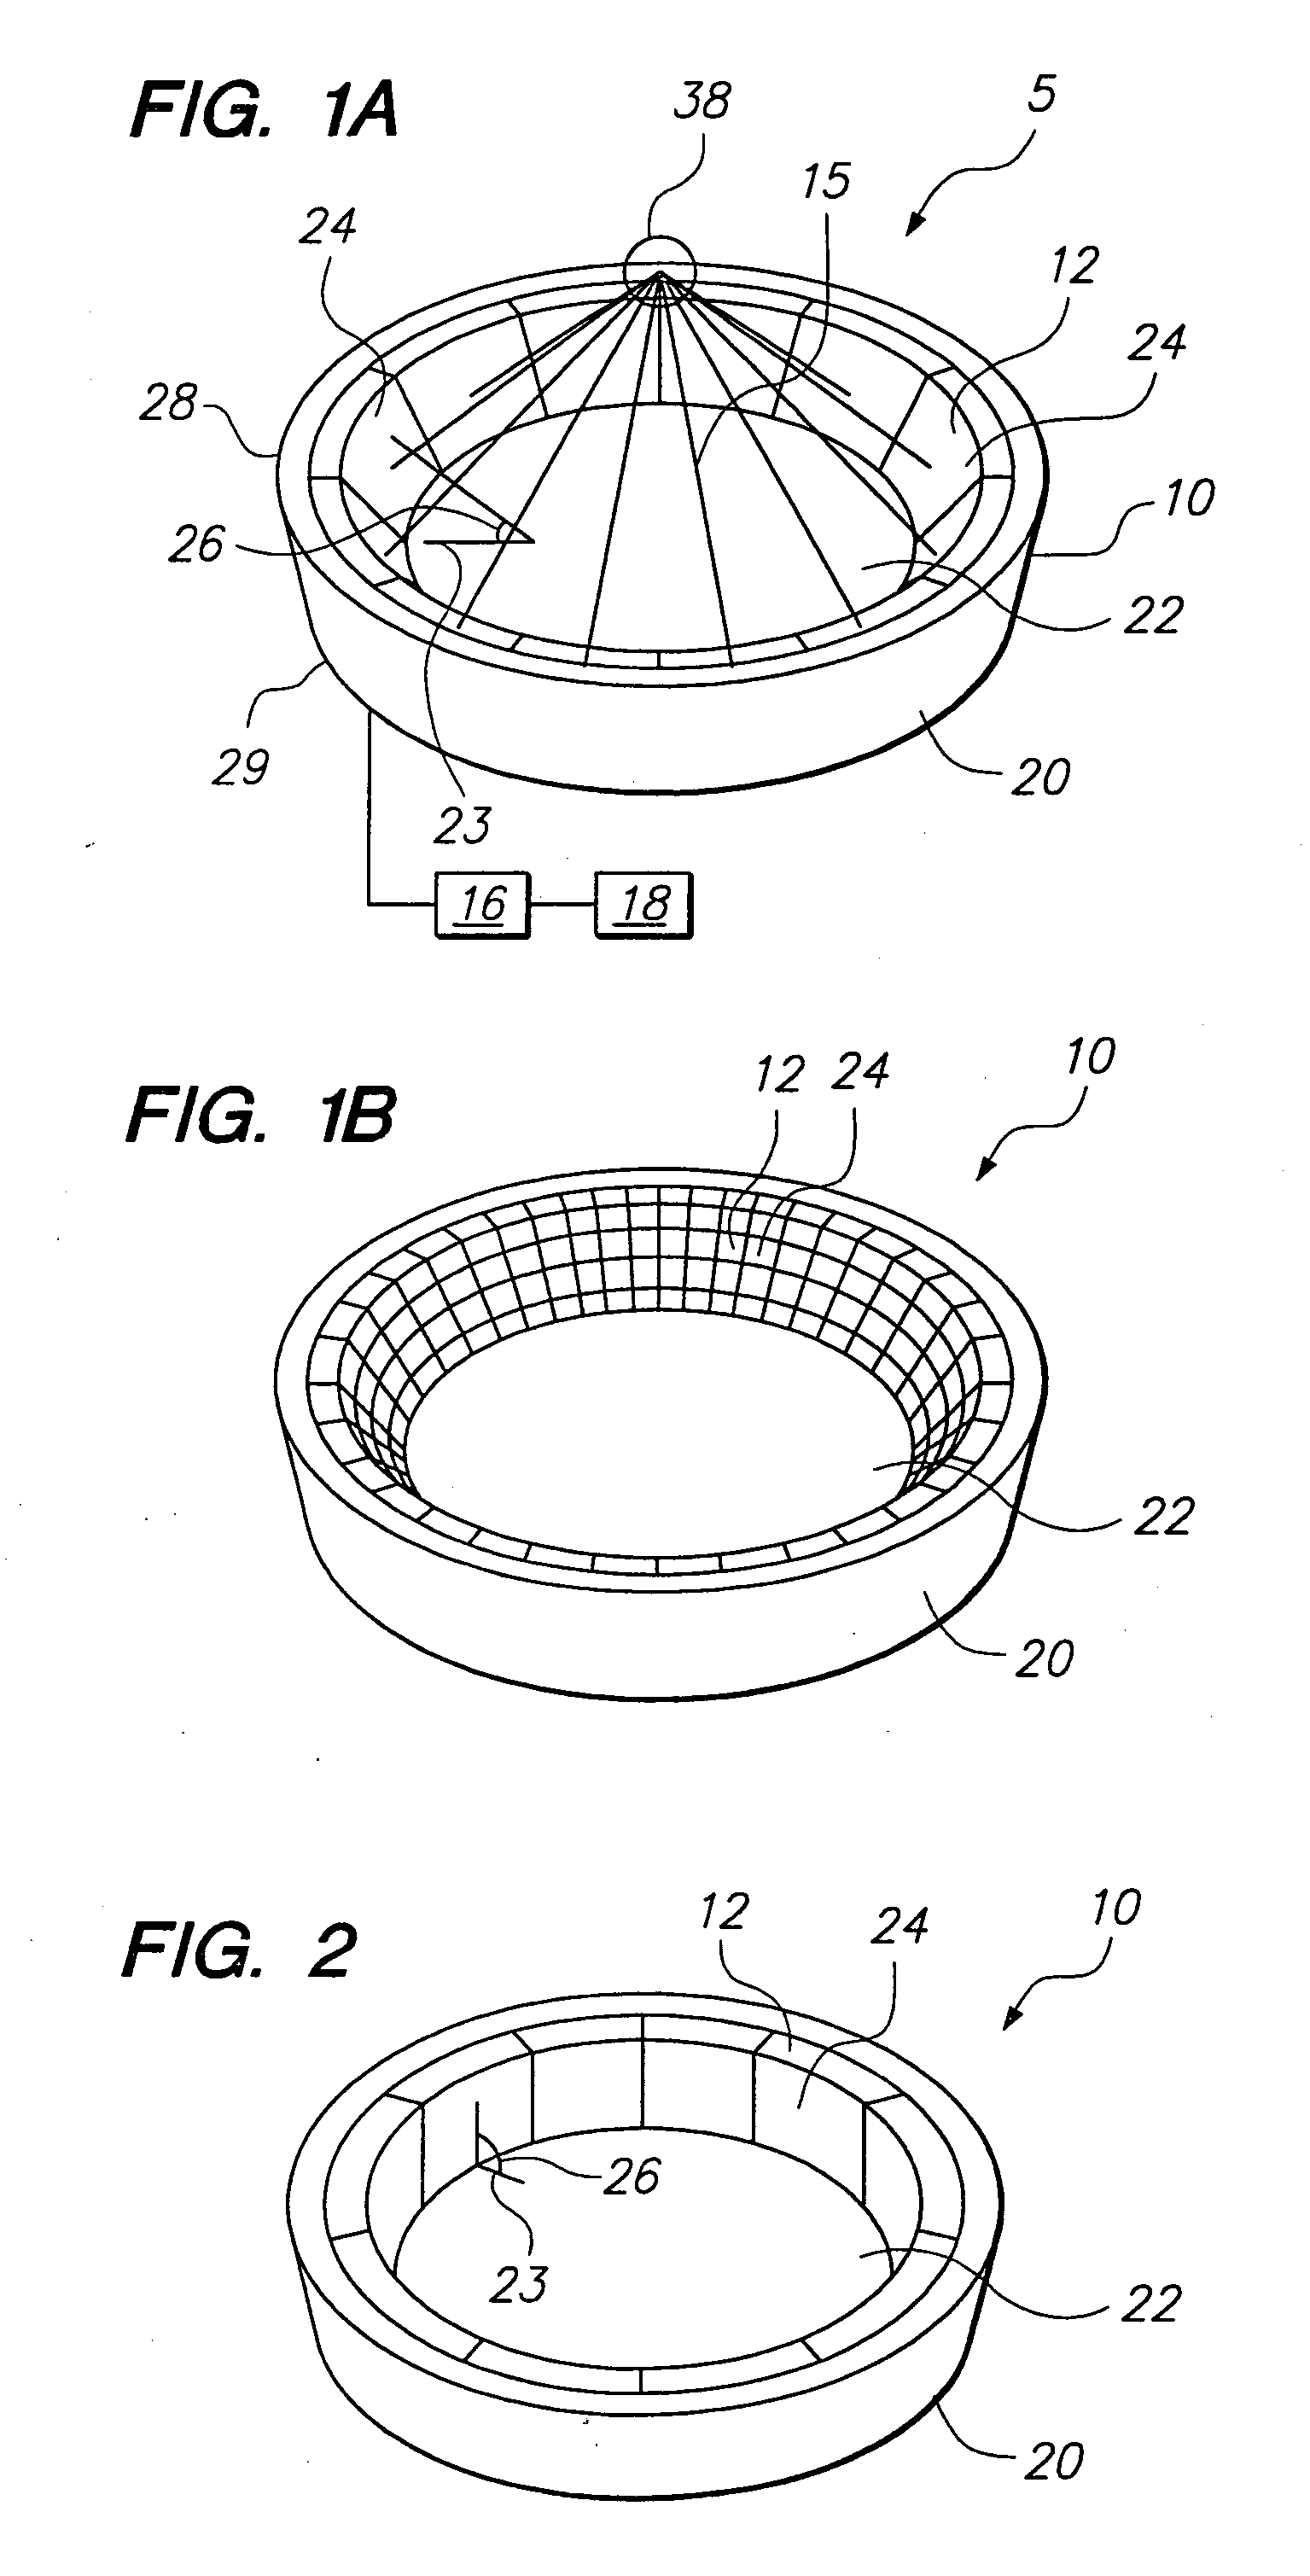 Focused ultrasound system for surrounding a body tissue mass